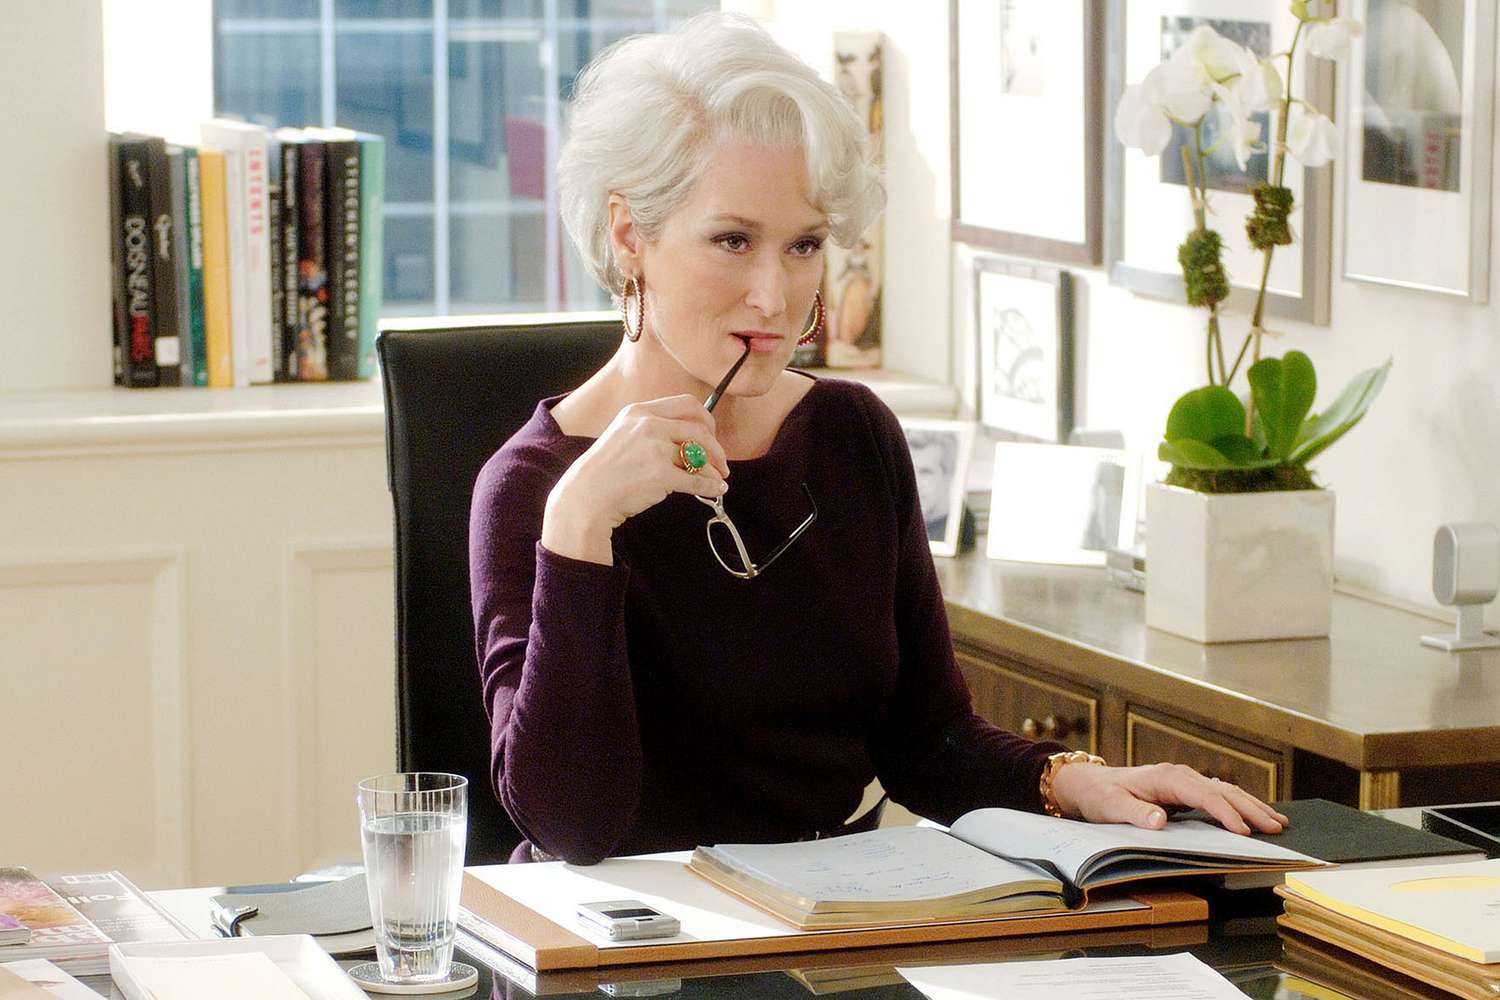 Miranda Priestley's Office Was a Dead Ringer for Its Inspiration